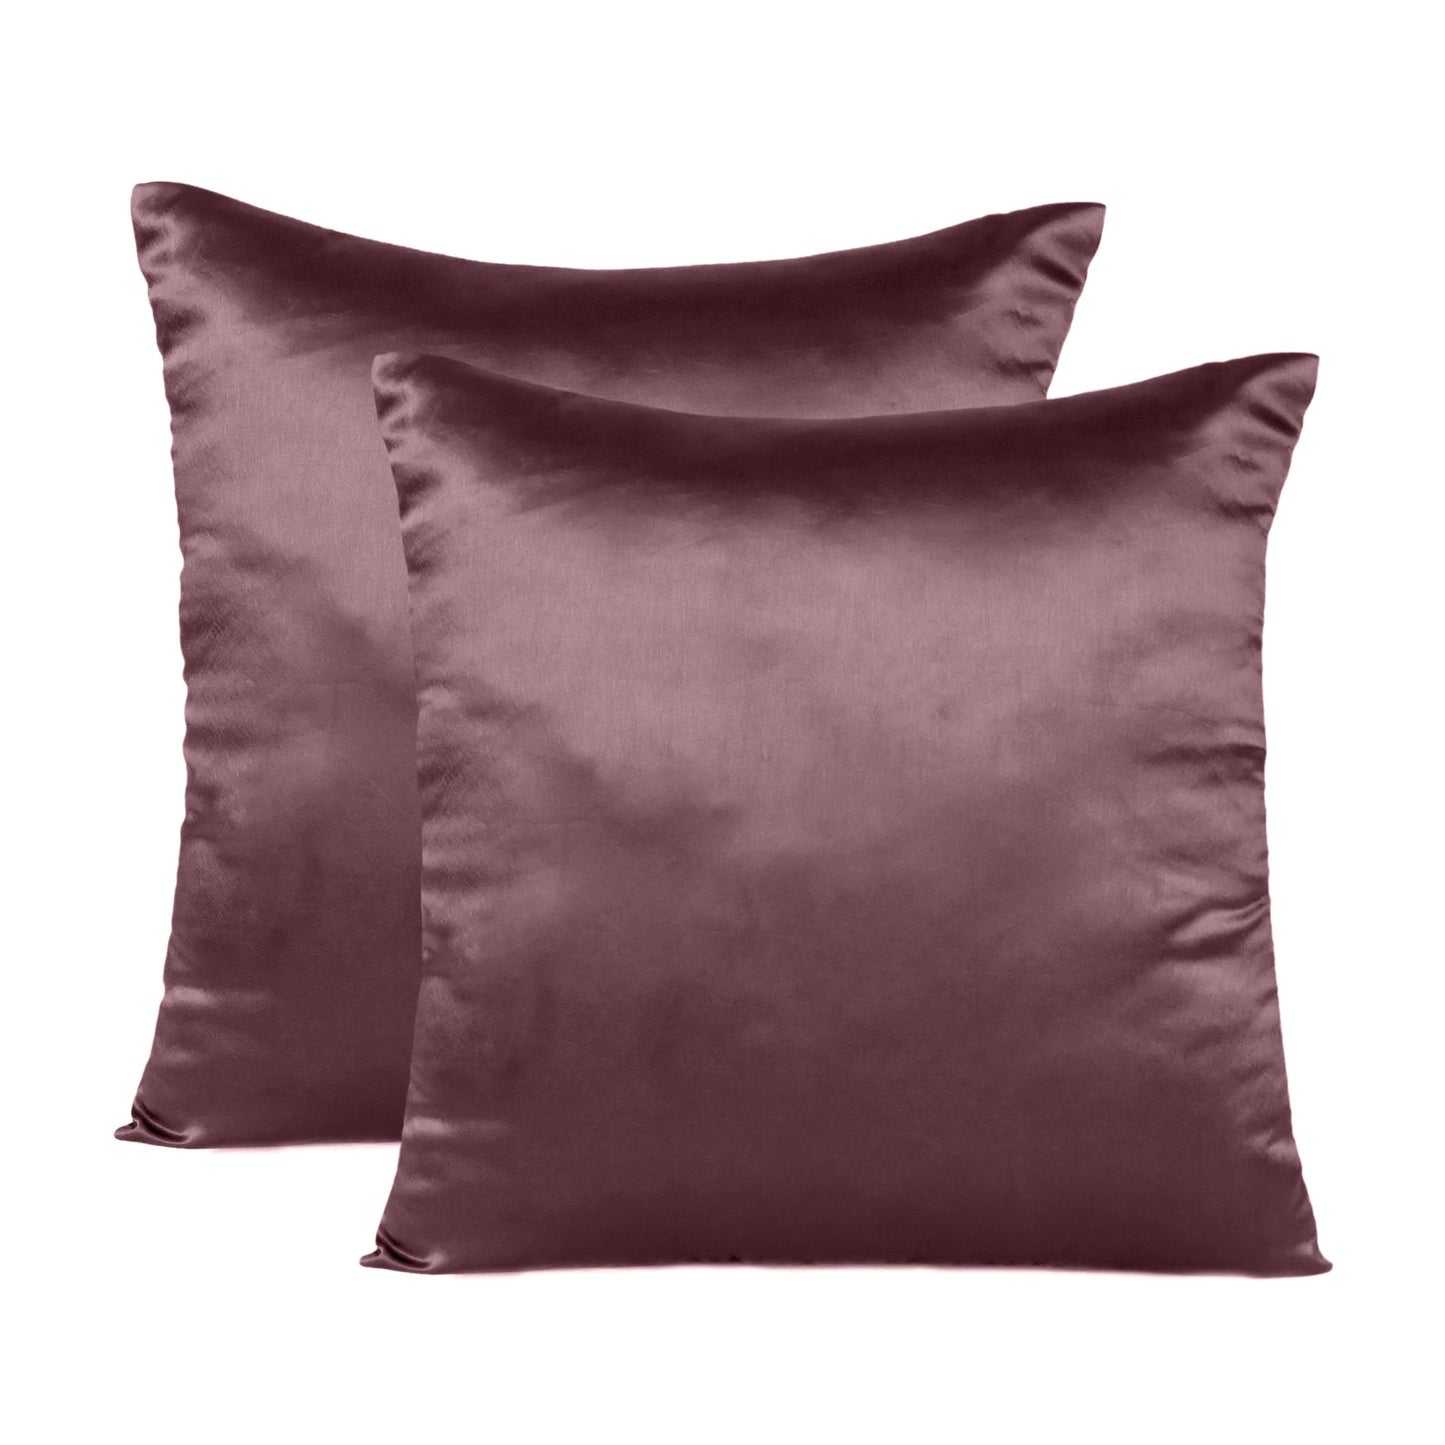 Grape Wine Satin Silky Cushion Covers in Set of 2